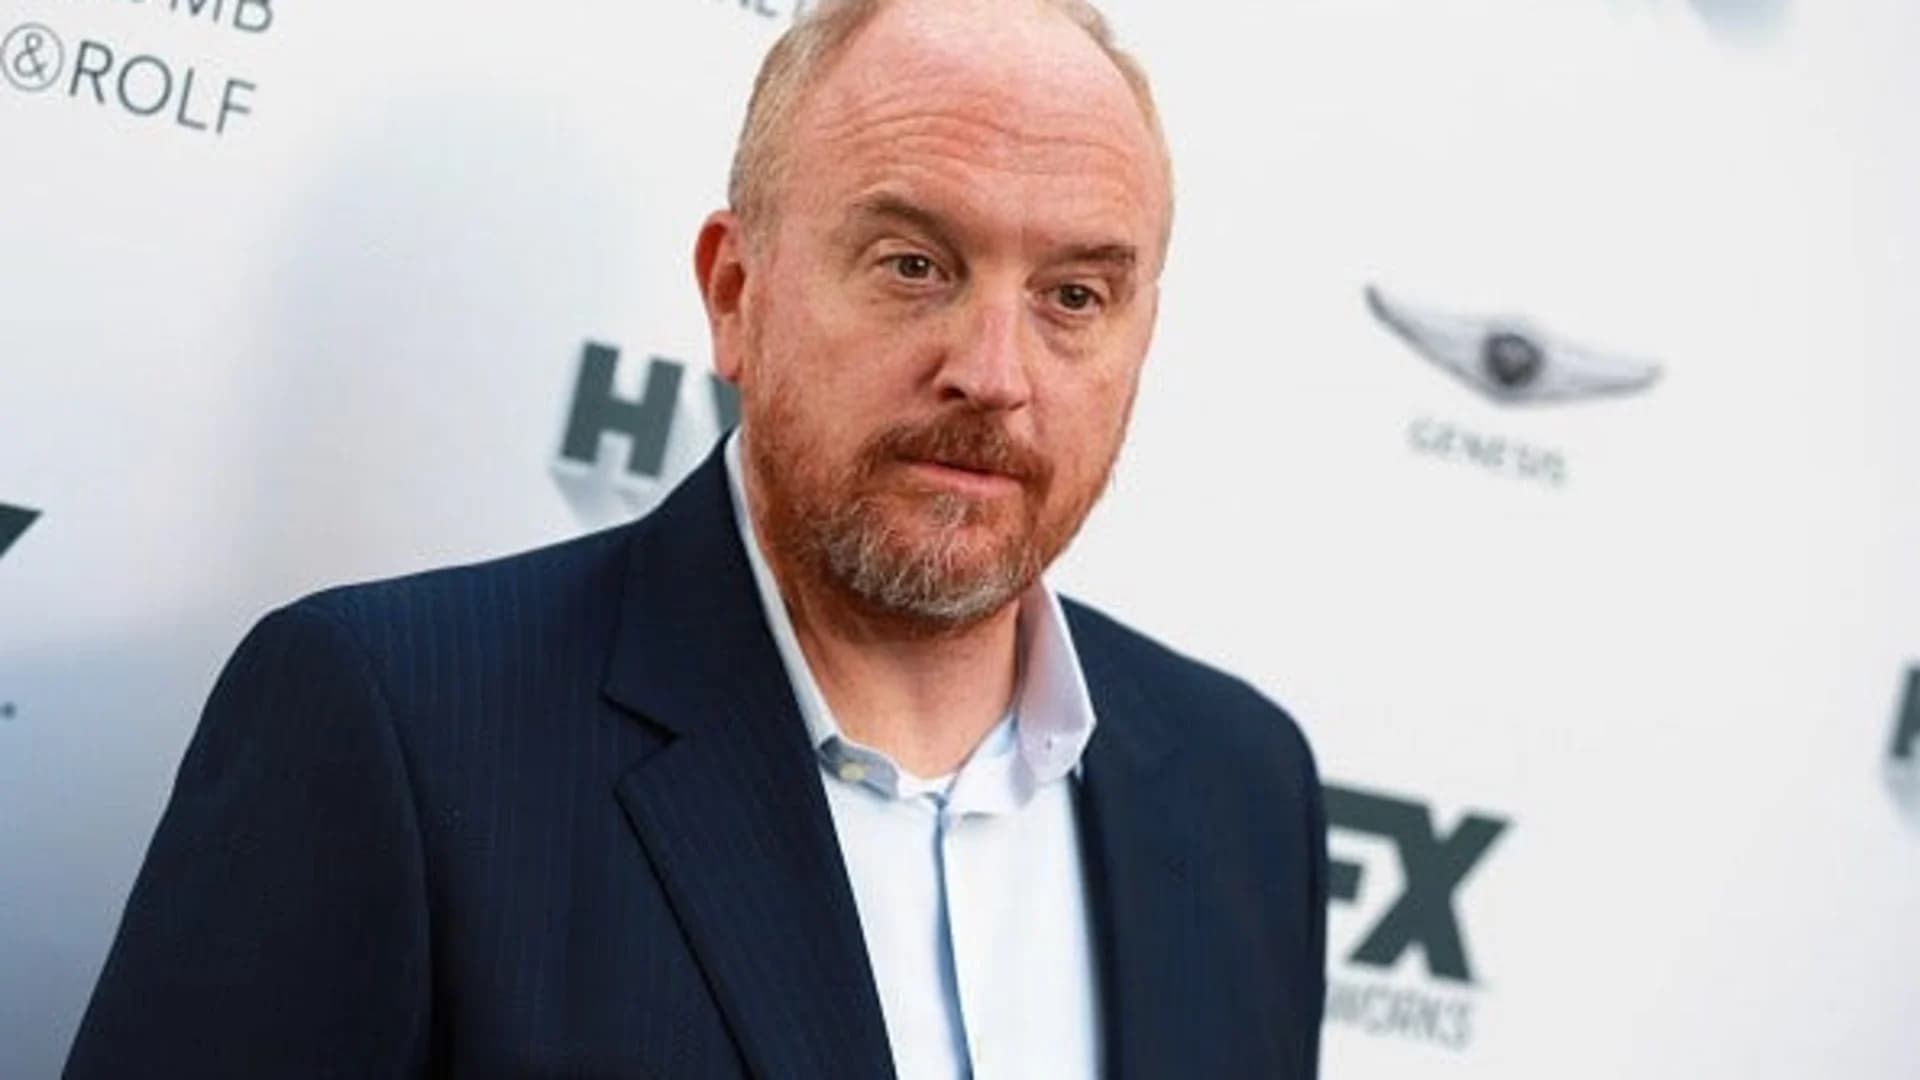 'Stories are true': Louis C.K. statement on allegations